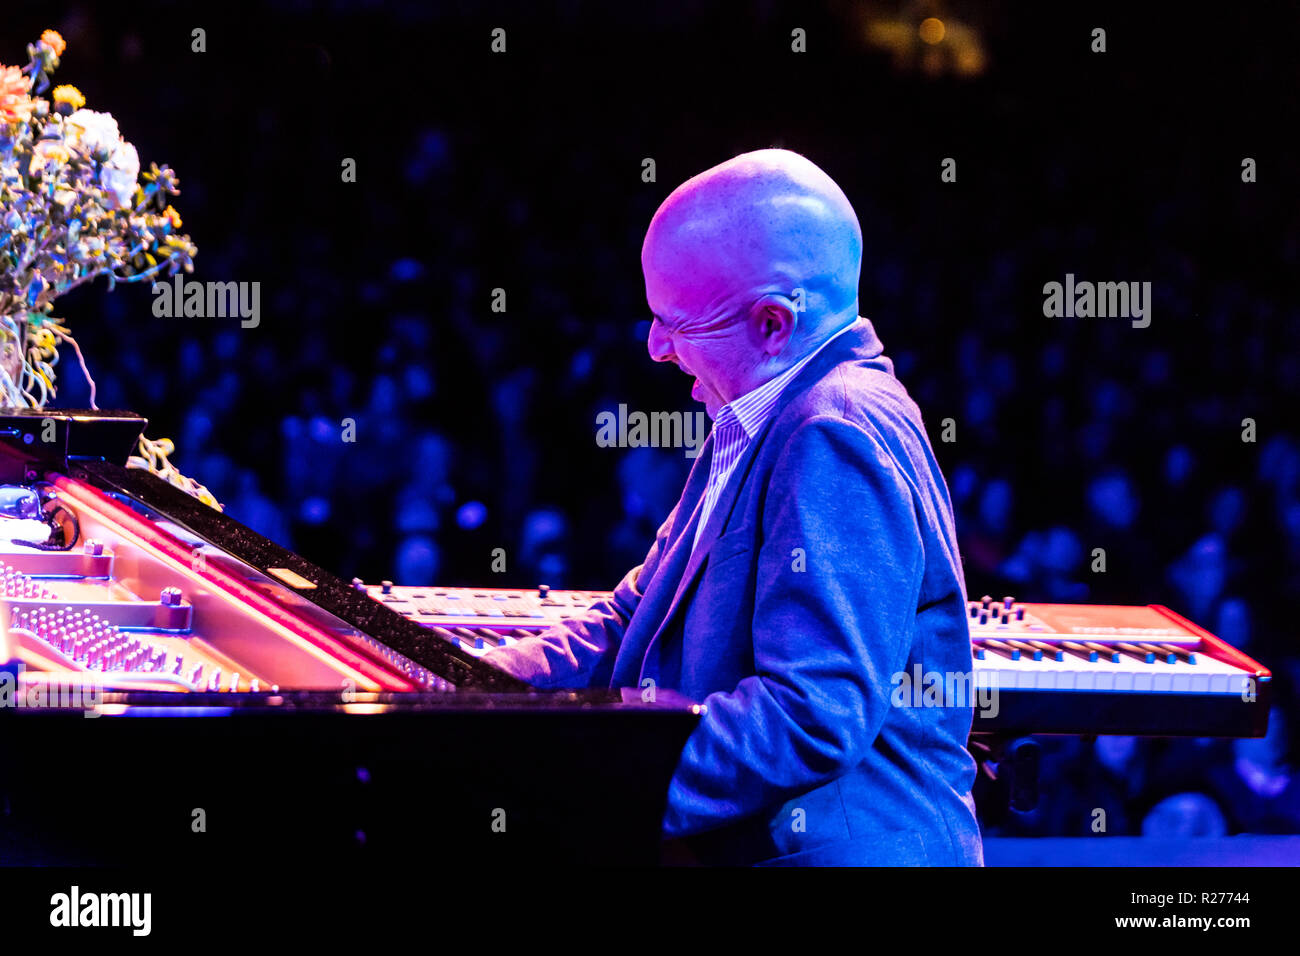 PETER MARTIN plays keyboards for DIANNE REEVES at the 61st MONTEREY JAZZ FESTIVAL - MONTEREY, CALIFORNIA Stock Photo